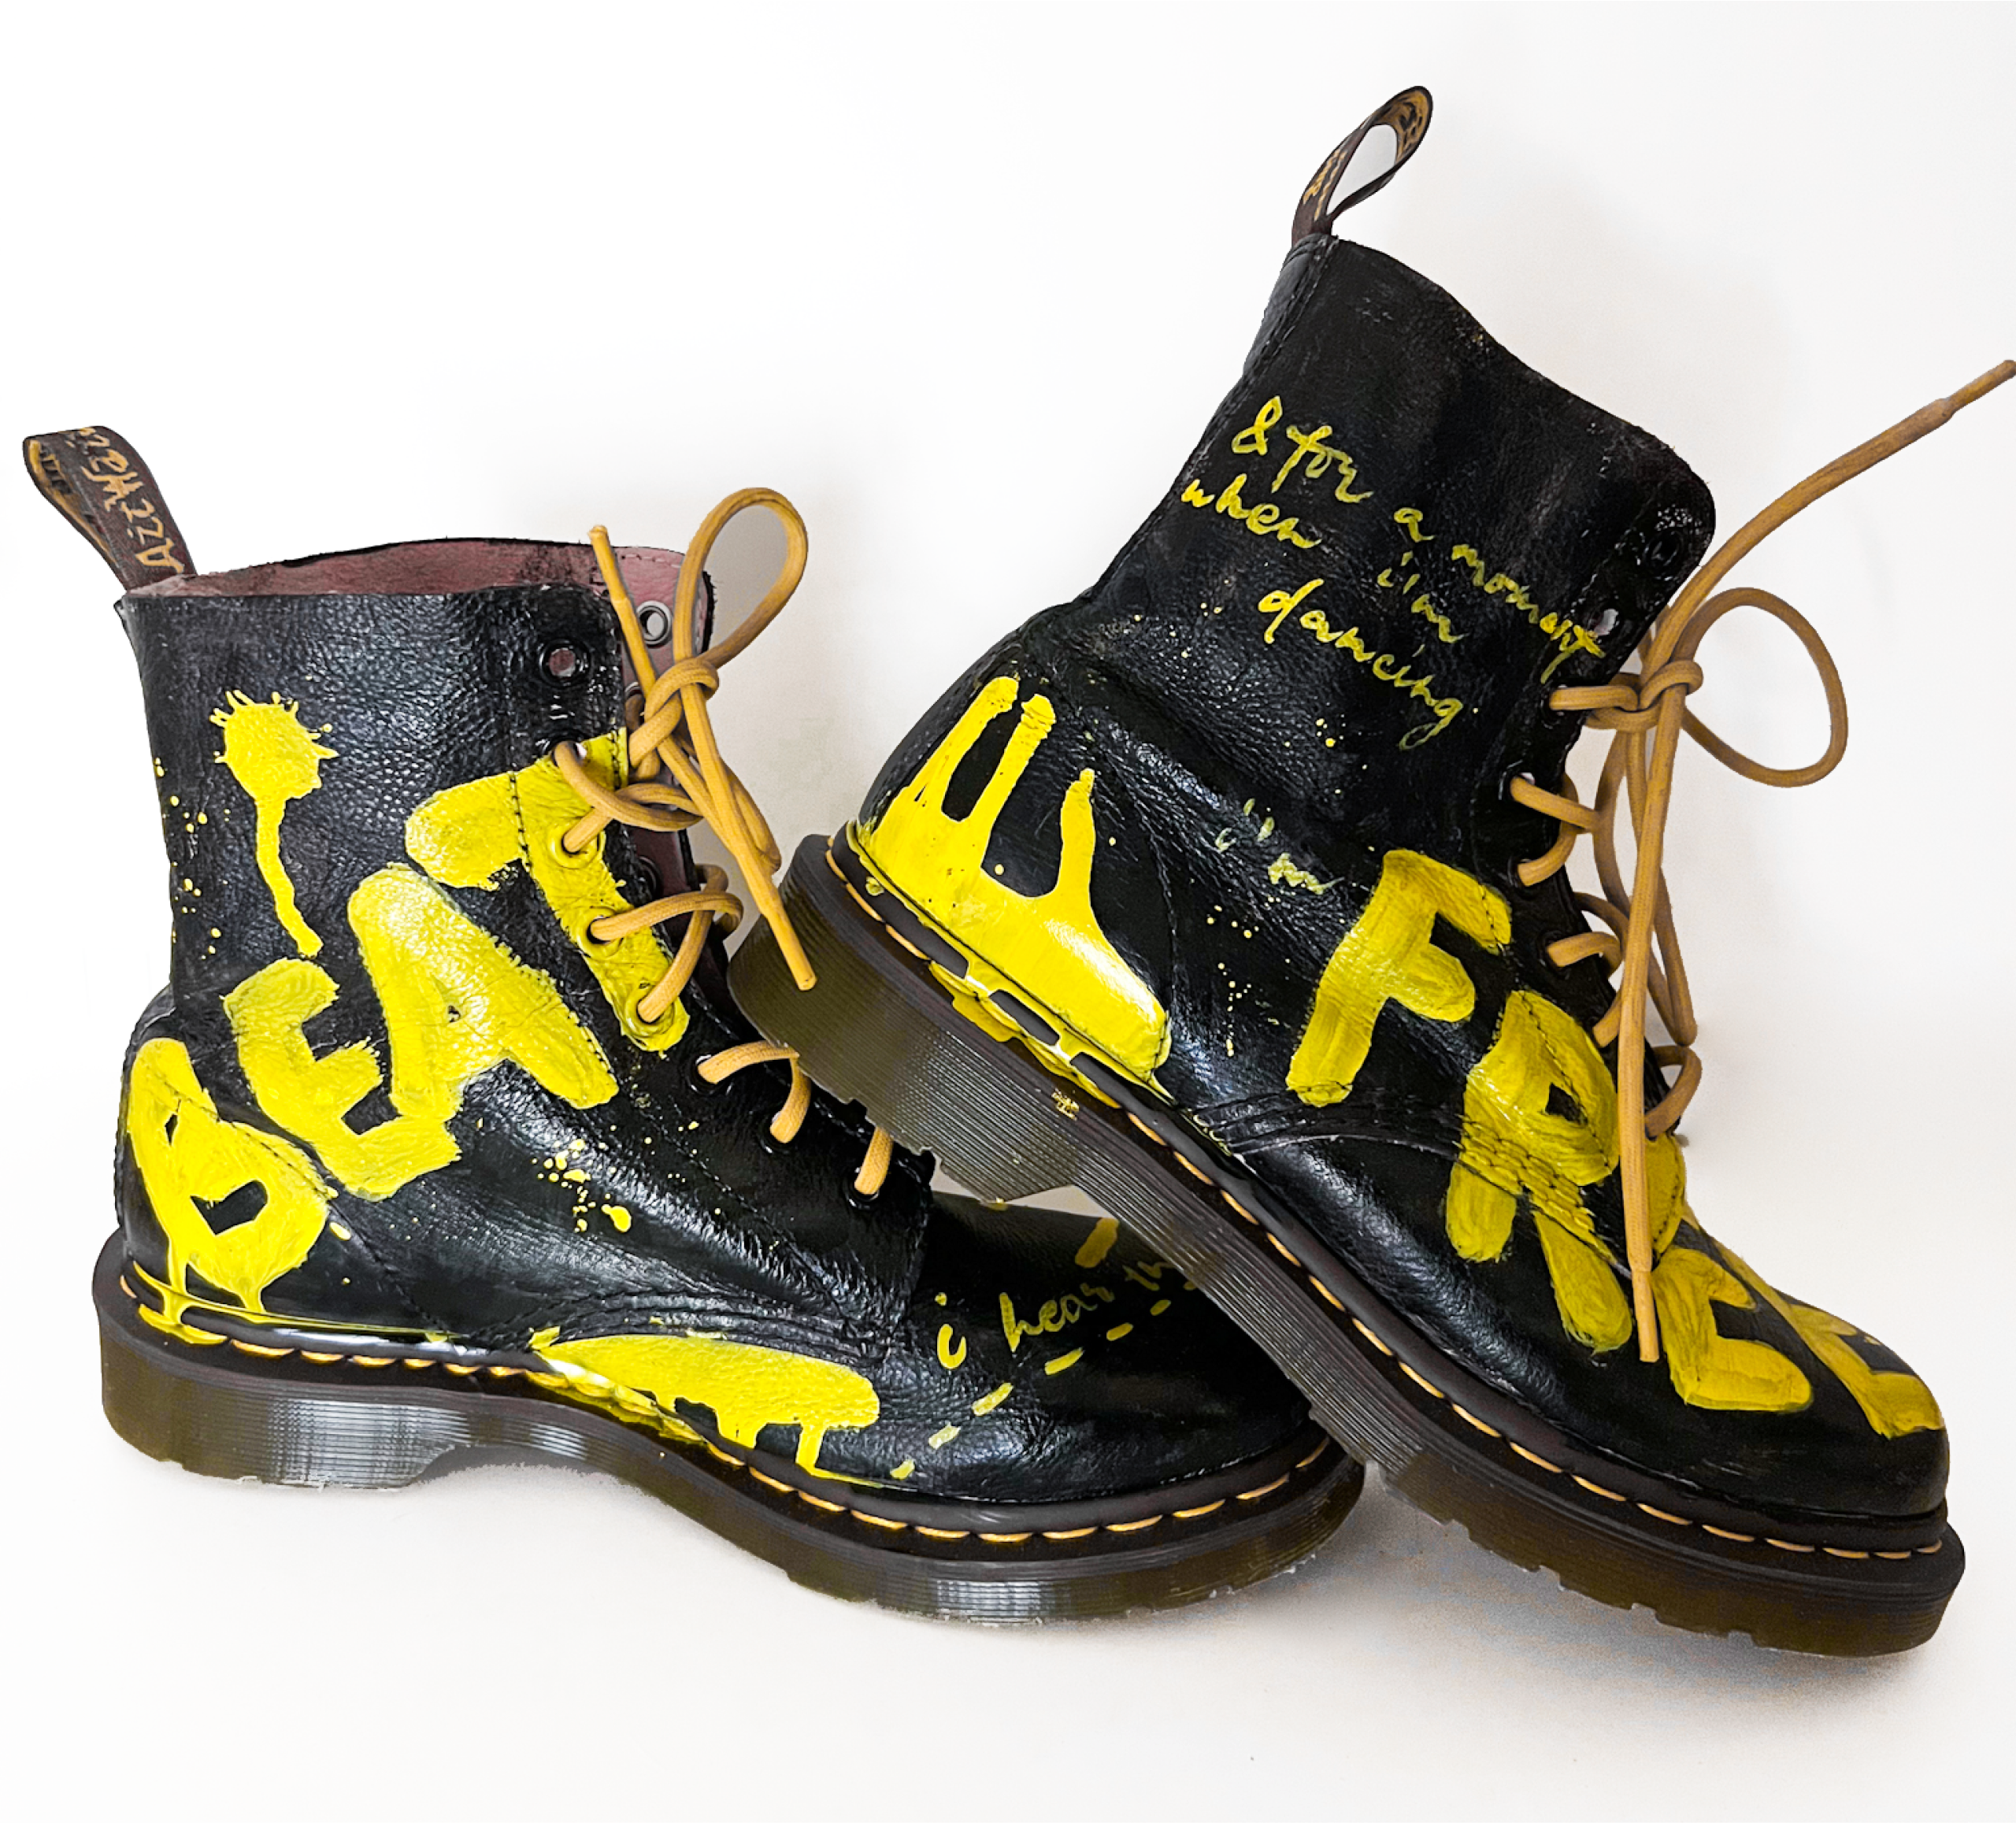 Custom painted dr. Martens with lyrics by Florence and the Machine. I hear the music, I feel the beat and for a moment while I'm dancing I'm free